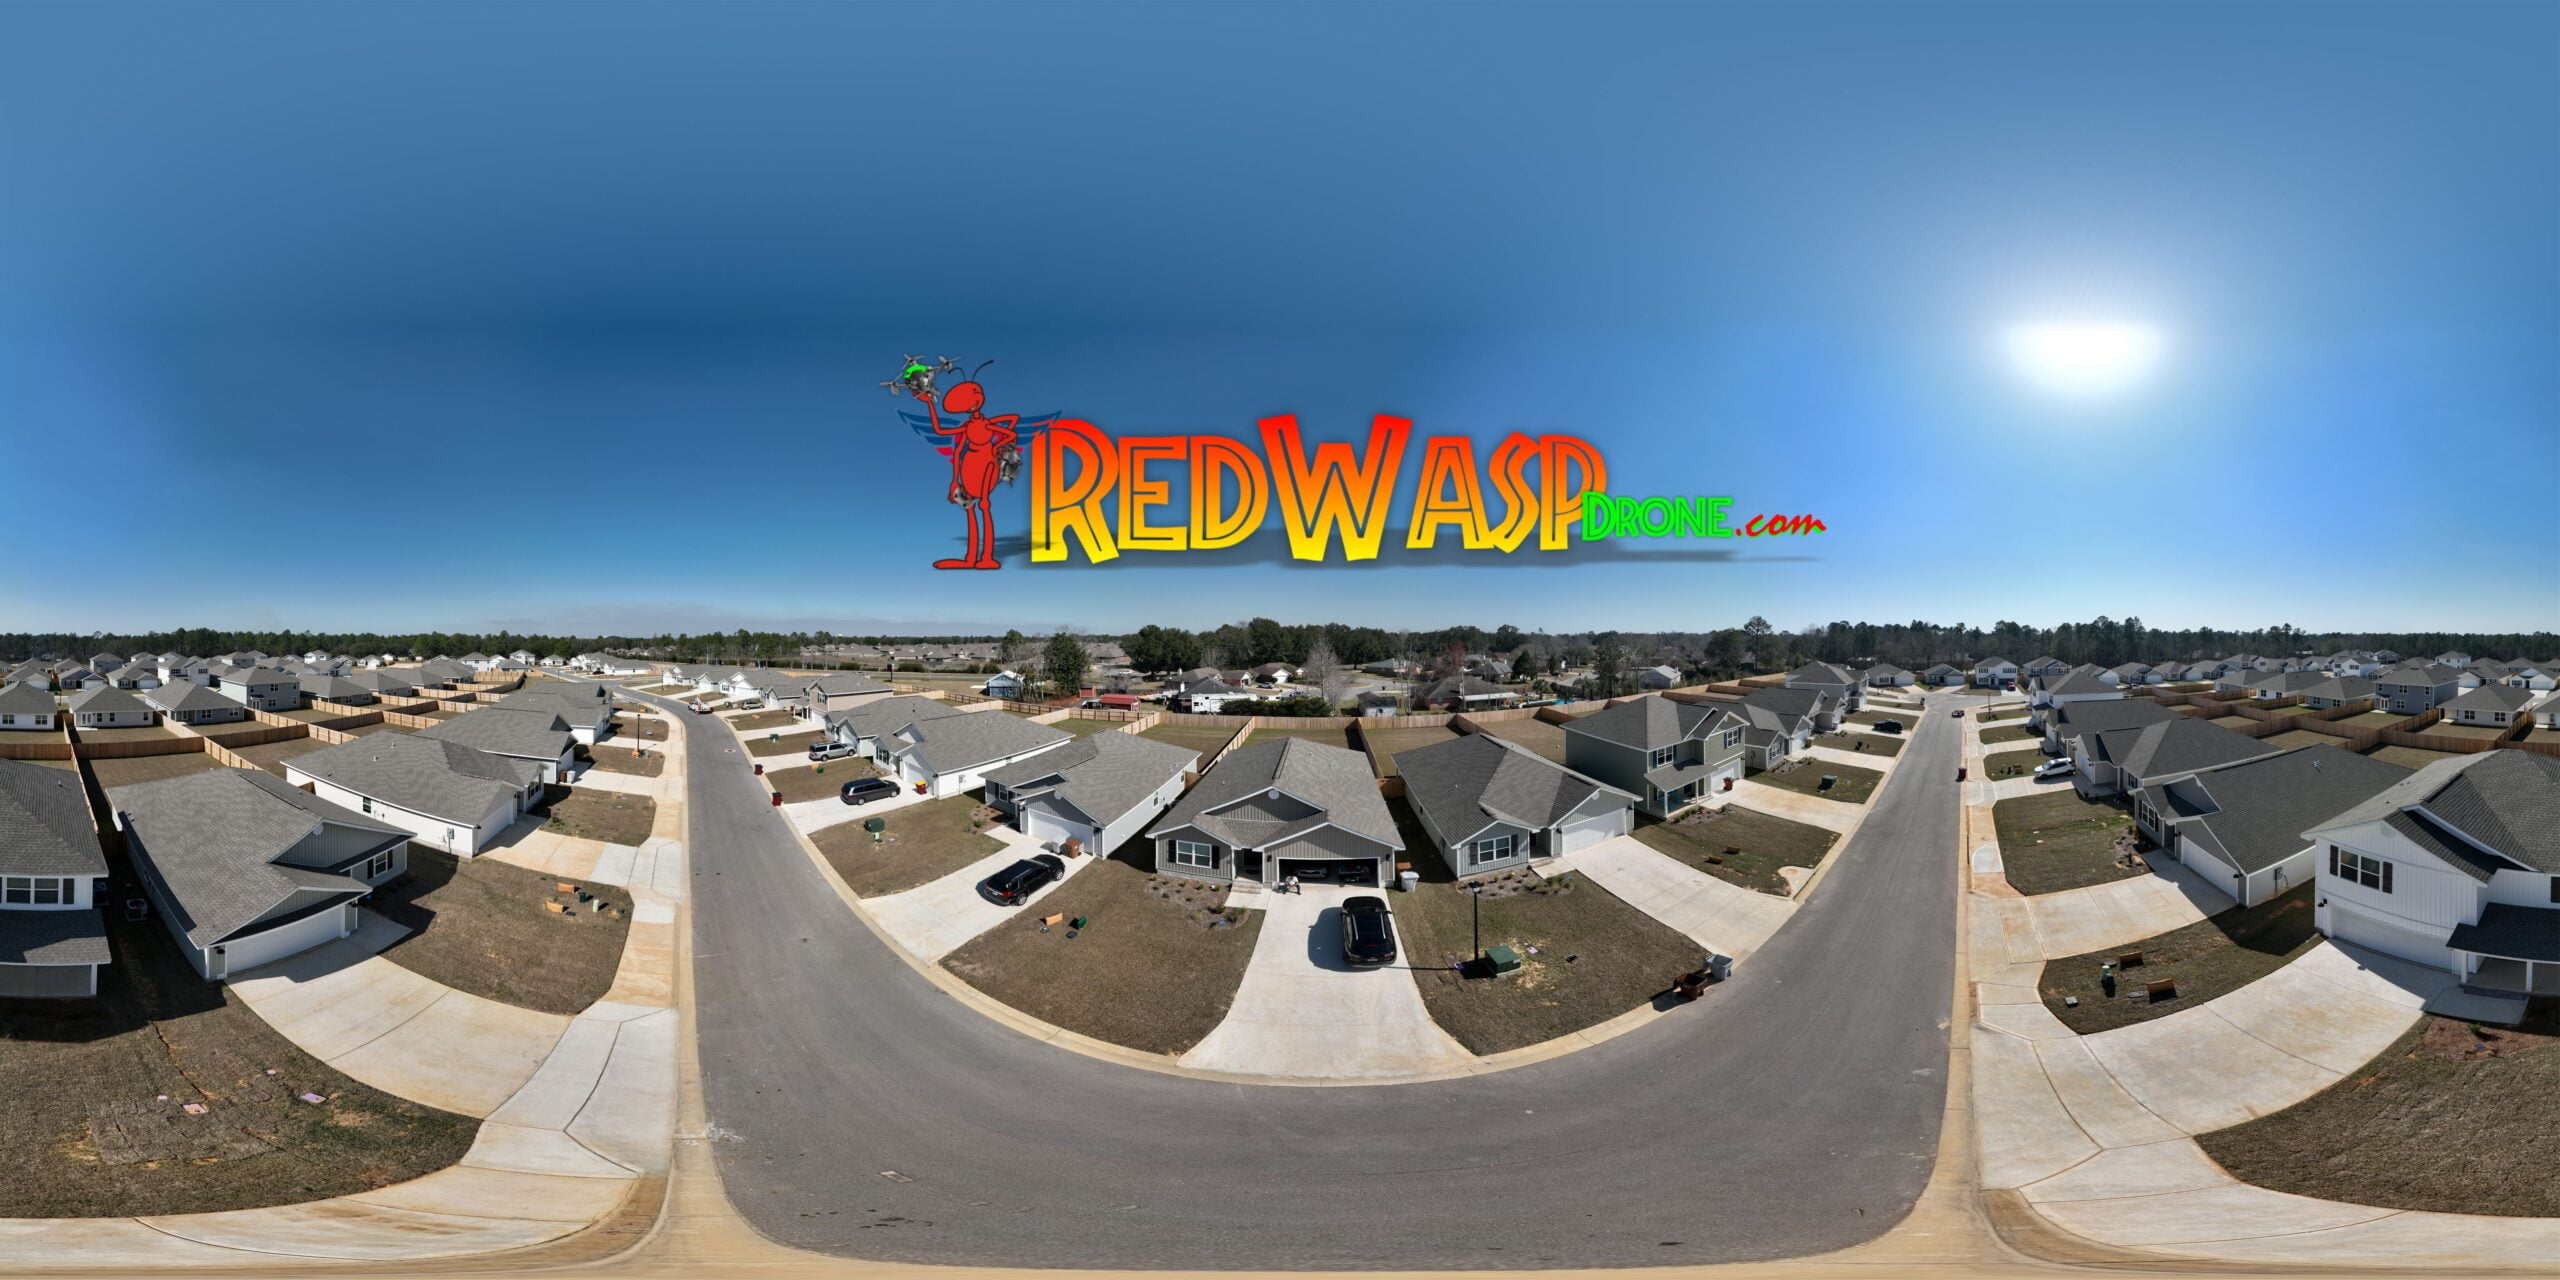 Red Wasp Drone, real estate drone services, aerial real estate photography, drone videography, virtual property tours